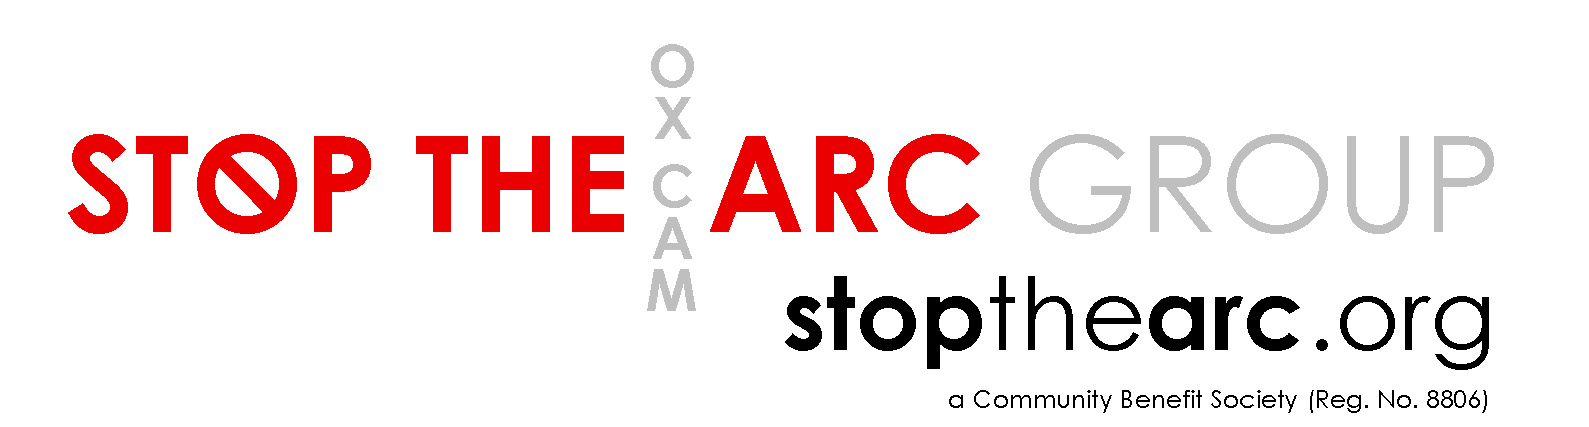 Stop the Arc Group logo